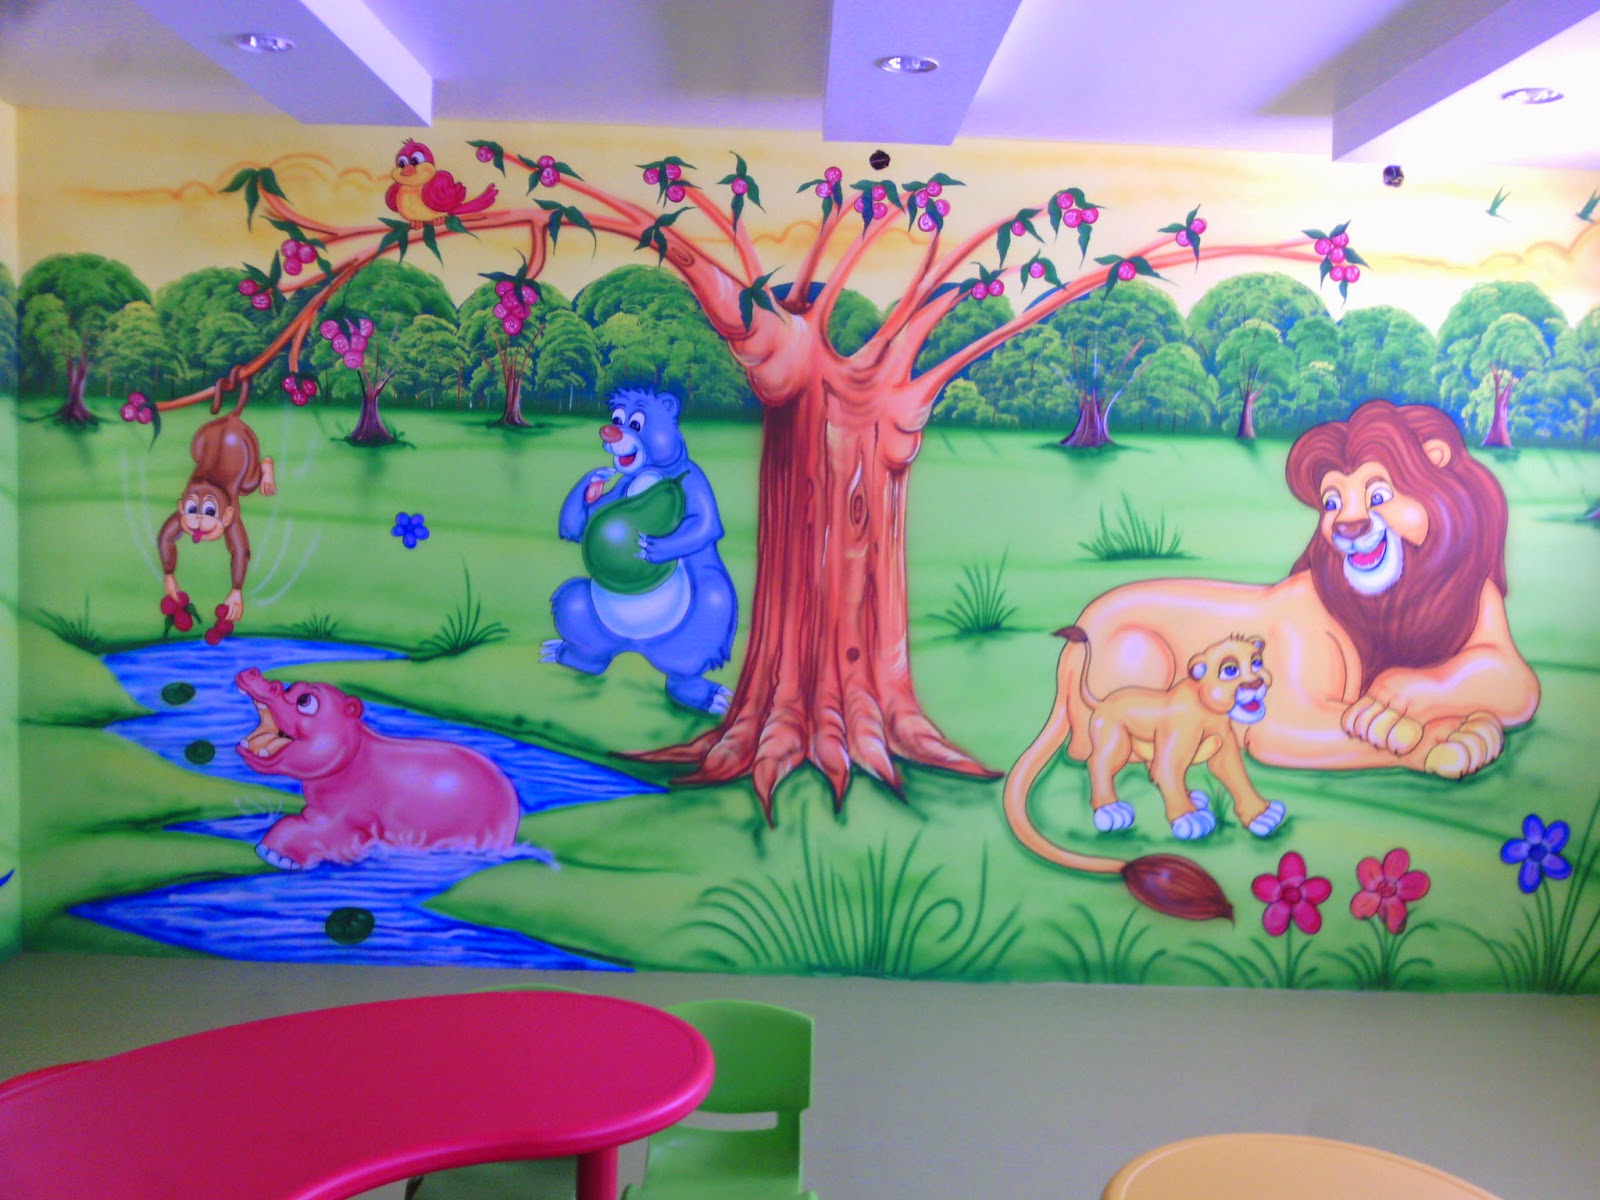 PLAY SCHOOL WALL PAINTING / 3D WALL PAINTING / CARTOON PAINTING / KIDS